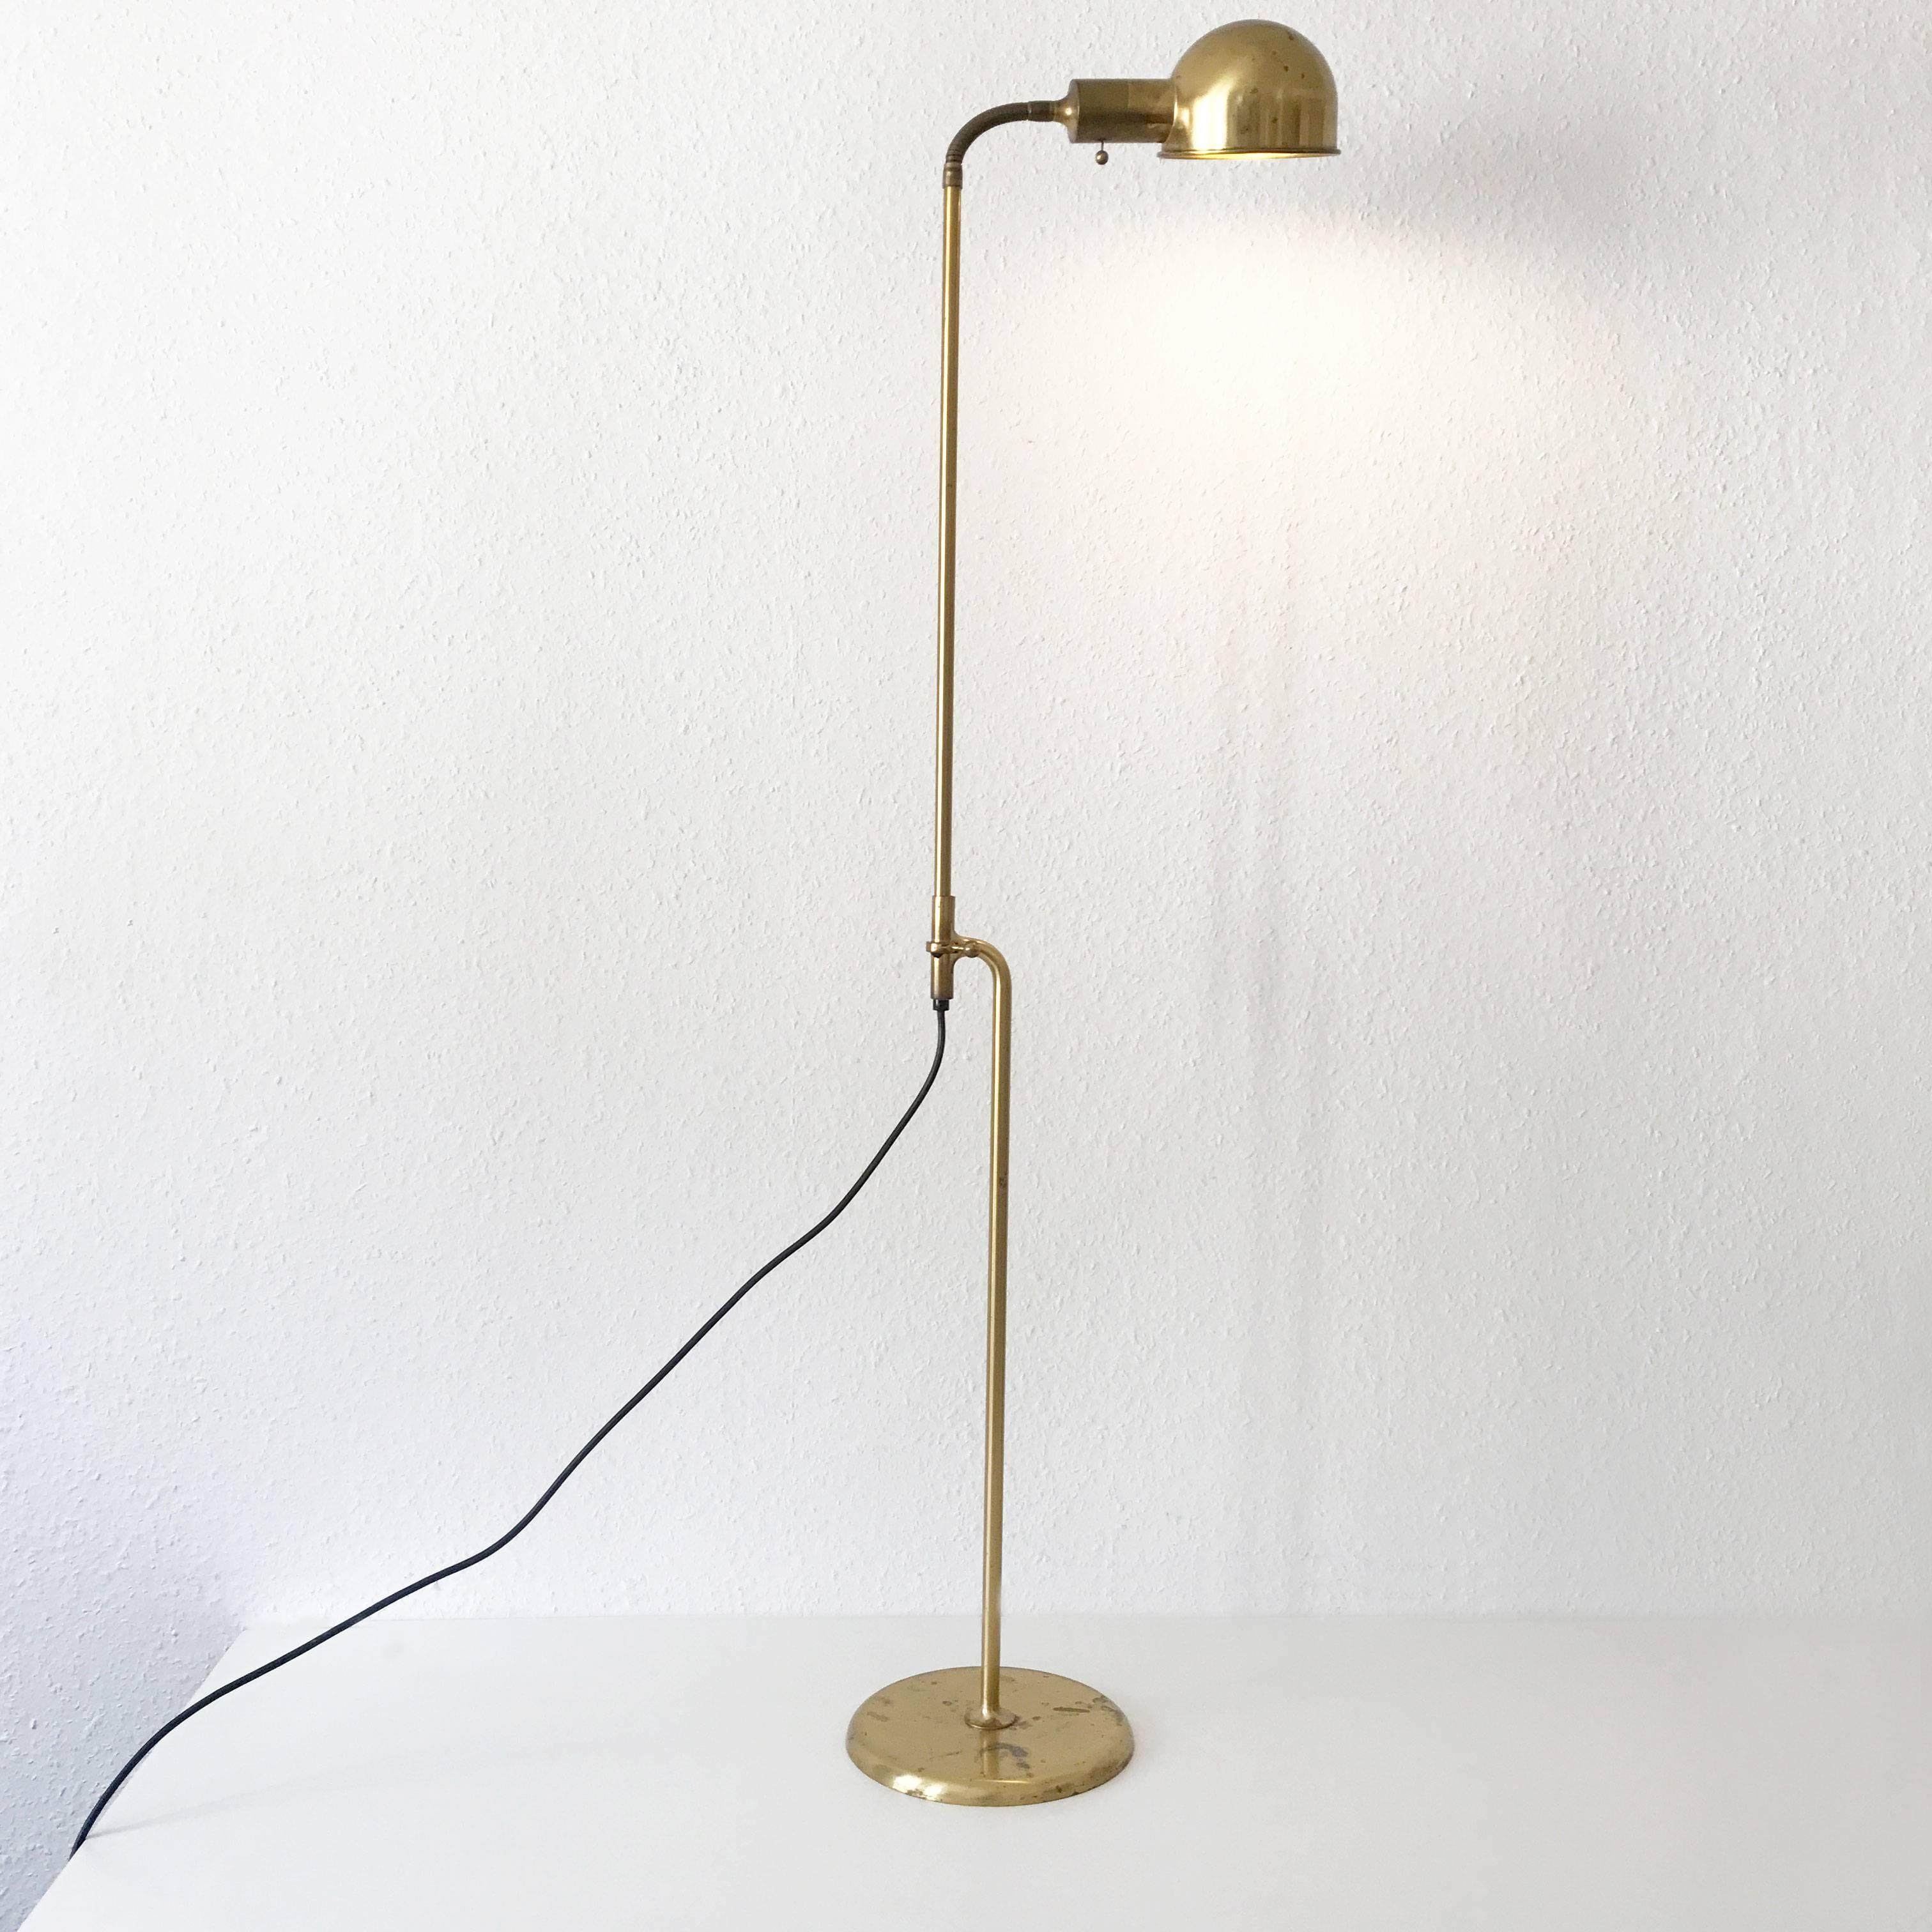 Articulated Floor Lamp Or Reading Light Bola Florian throughout measurements 3024 X 3024